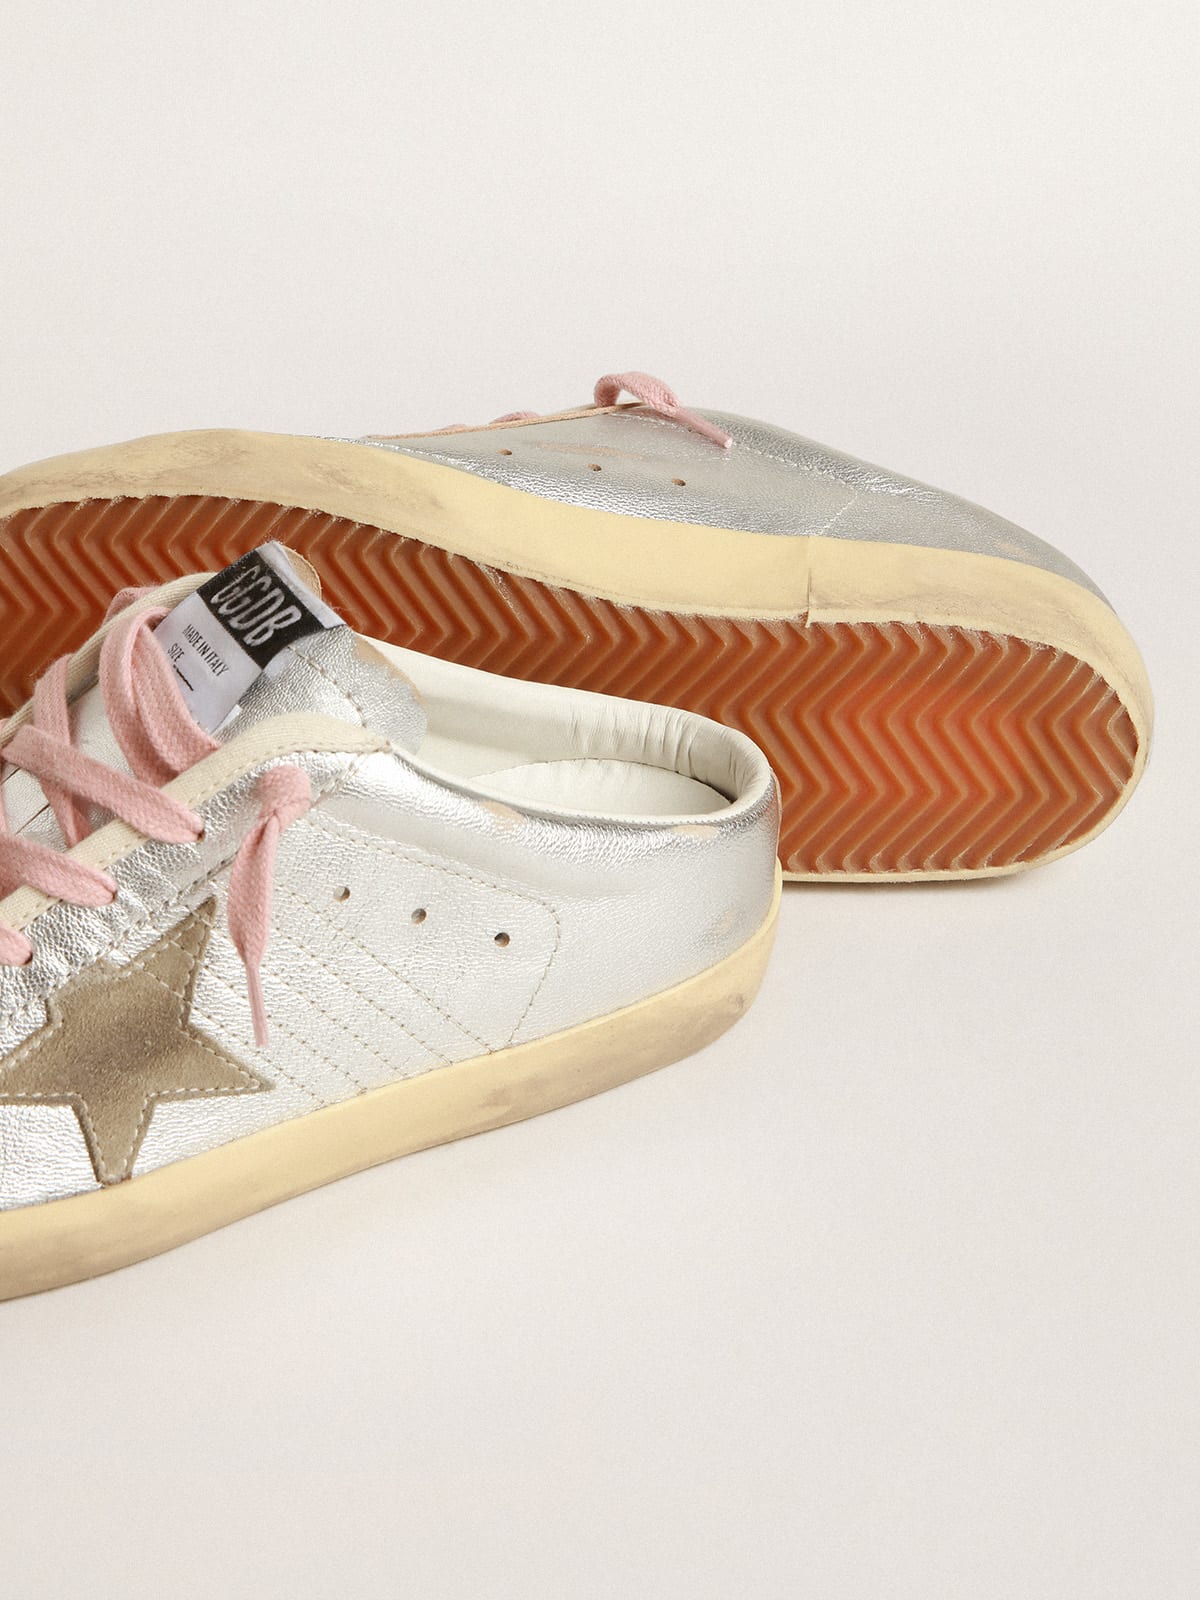 Golden Goose - Super-Star Sabots in silver metallic leather with suede star in 